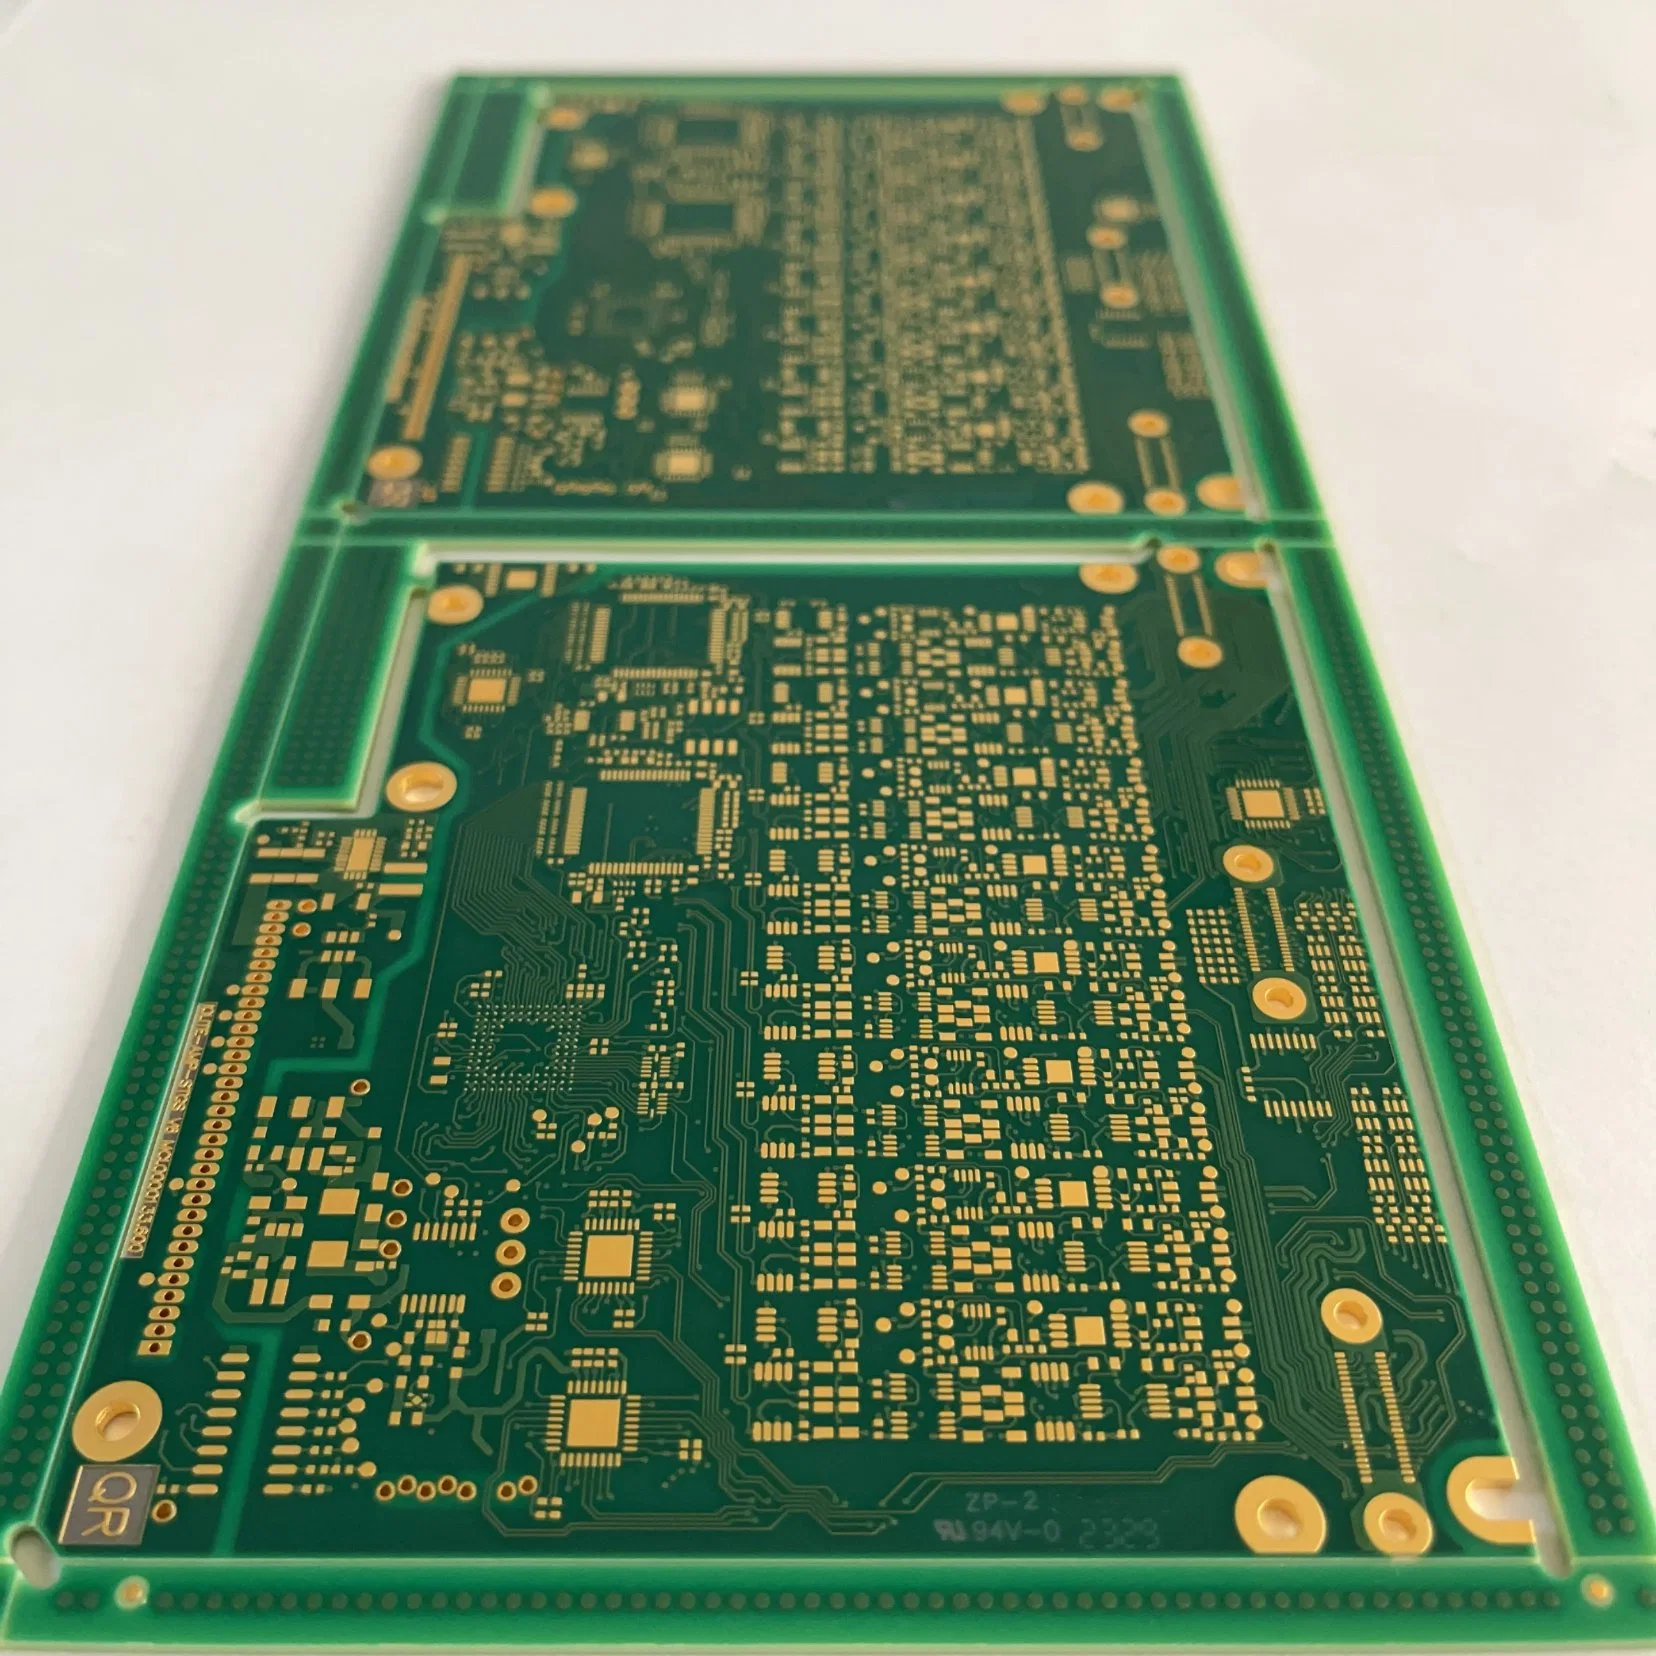 High Quality Multilayers Circuit Board Vias Filled with Resin and Capped Over Copper